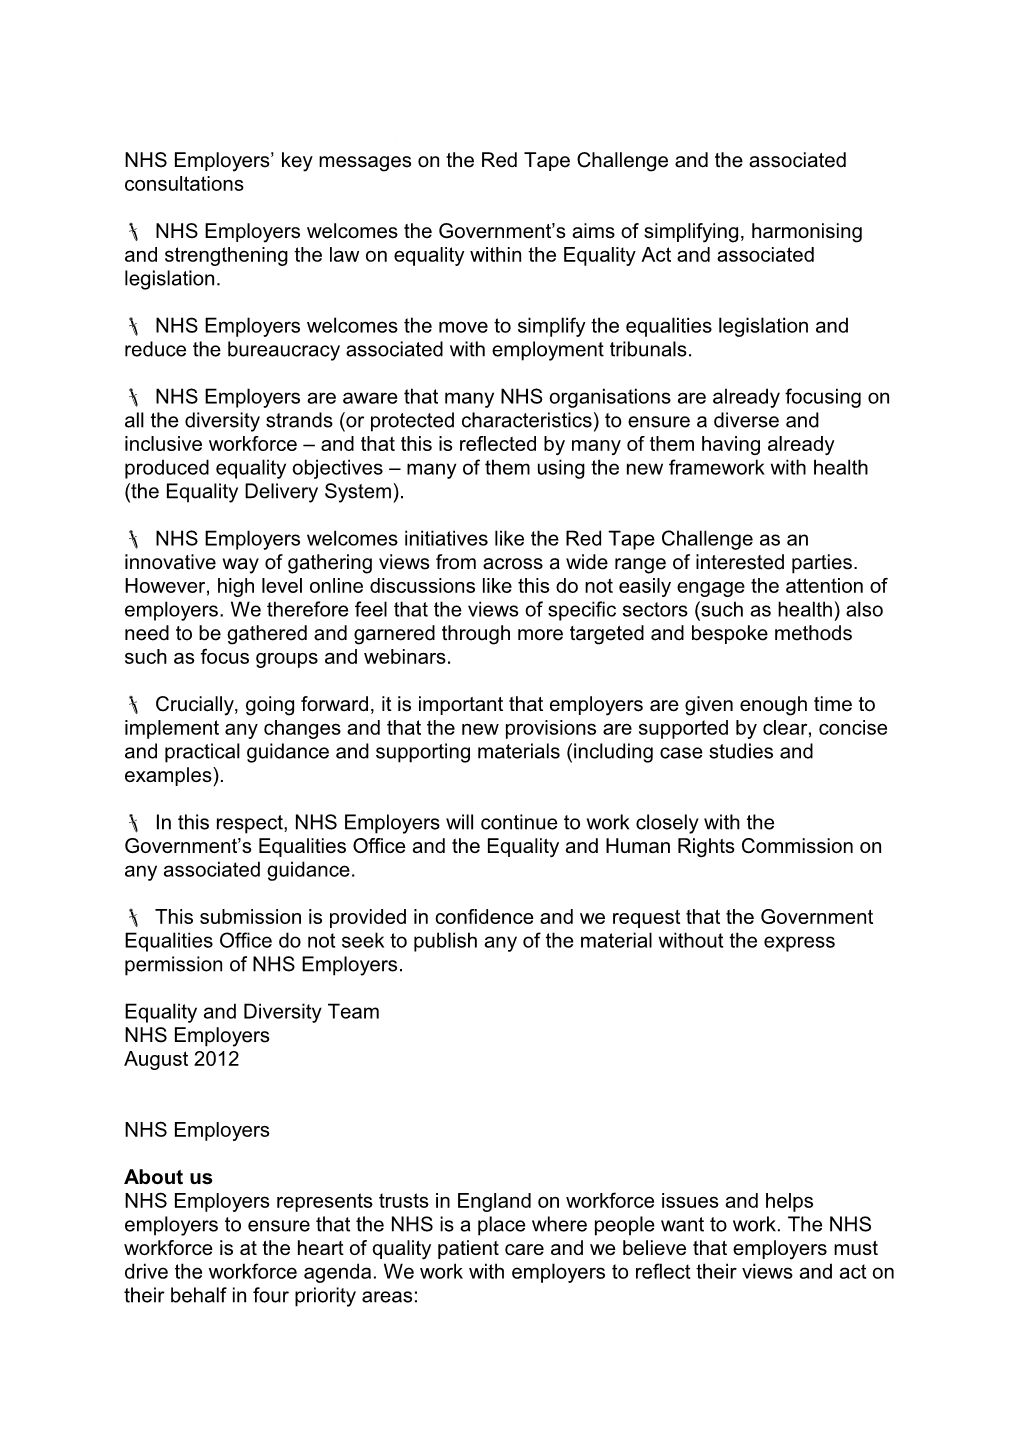 NHS Employers Submission in Response